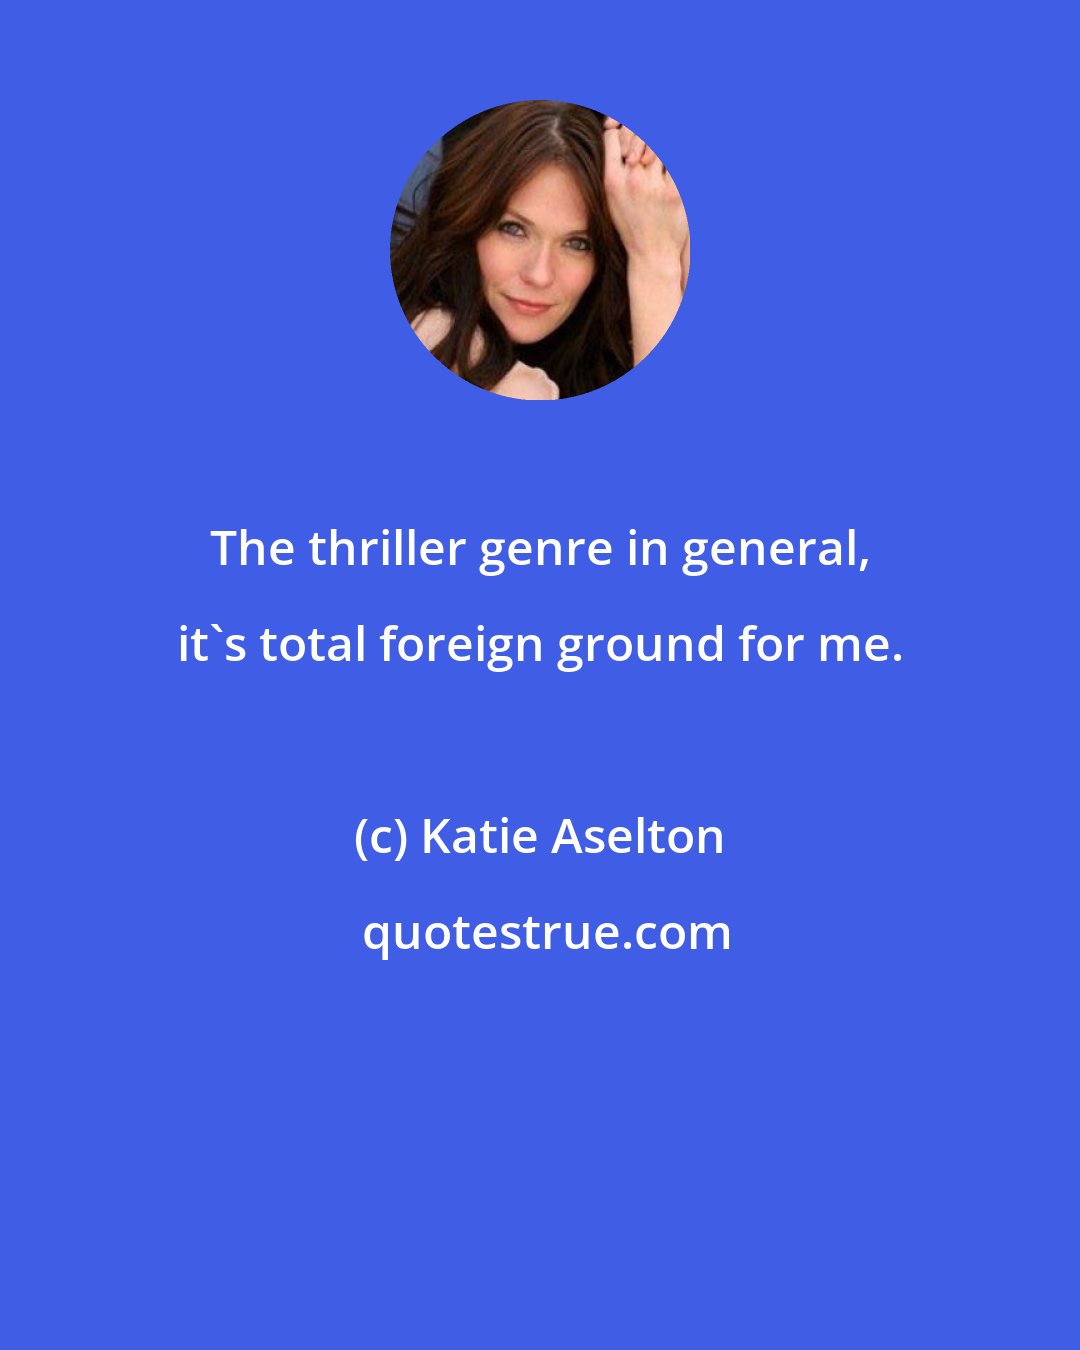 Katie Aselton: The thriller genre in general, it's total foreign ground for me.